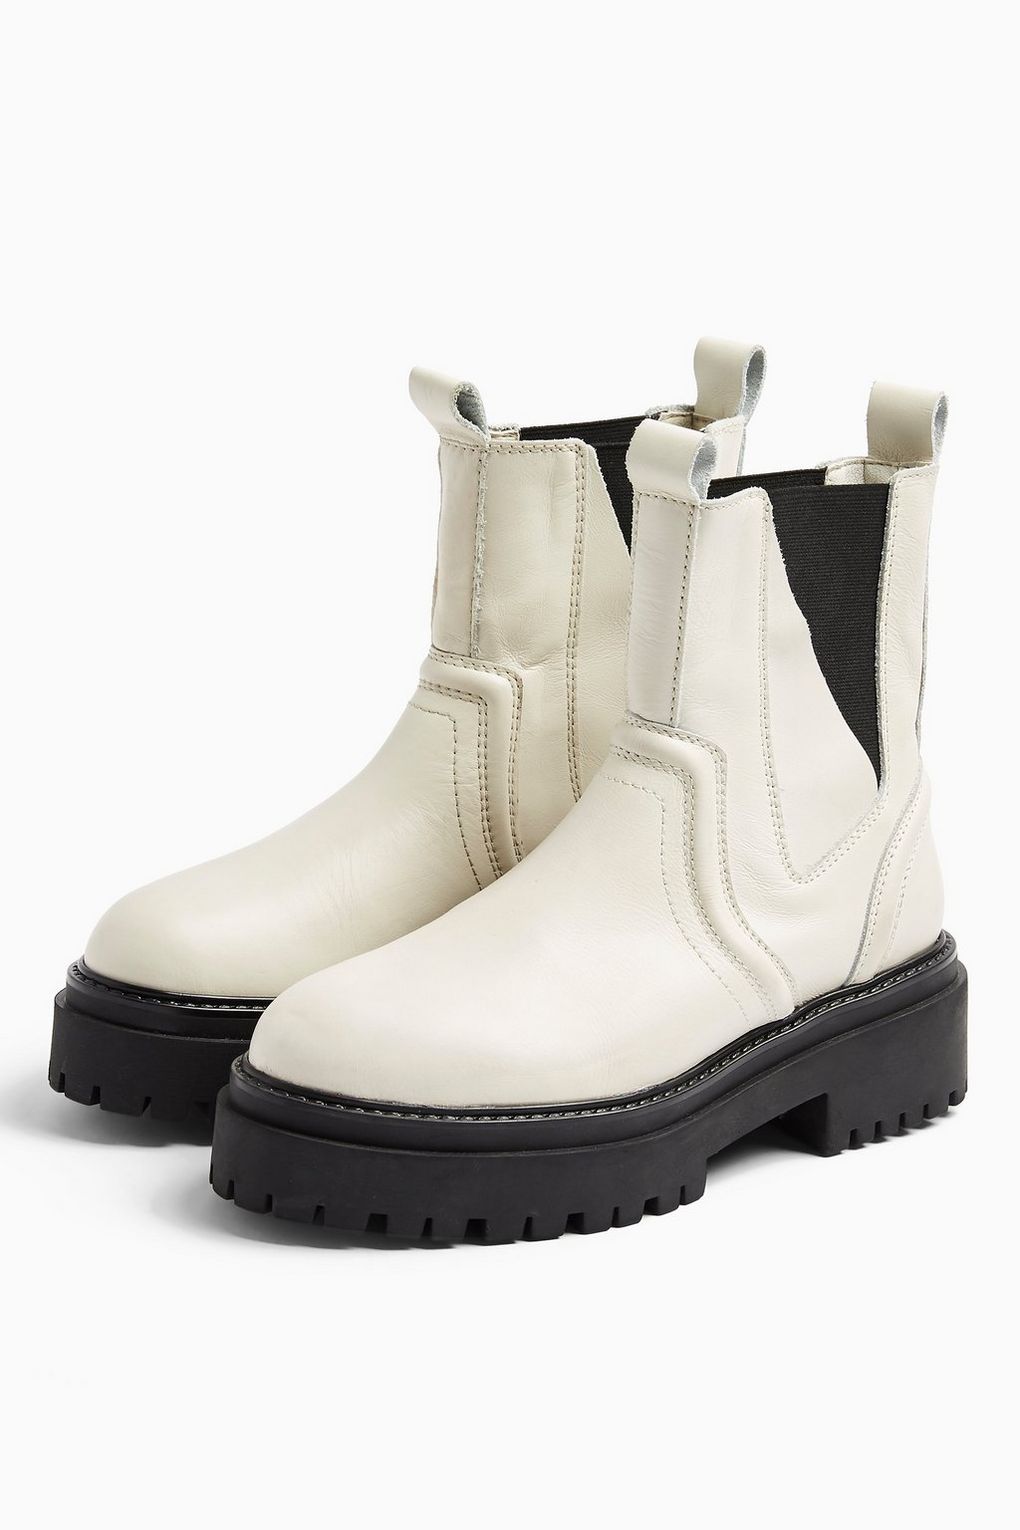 monty square toe ankle boots